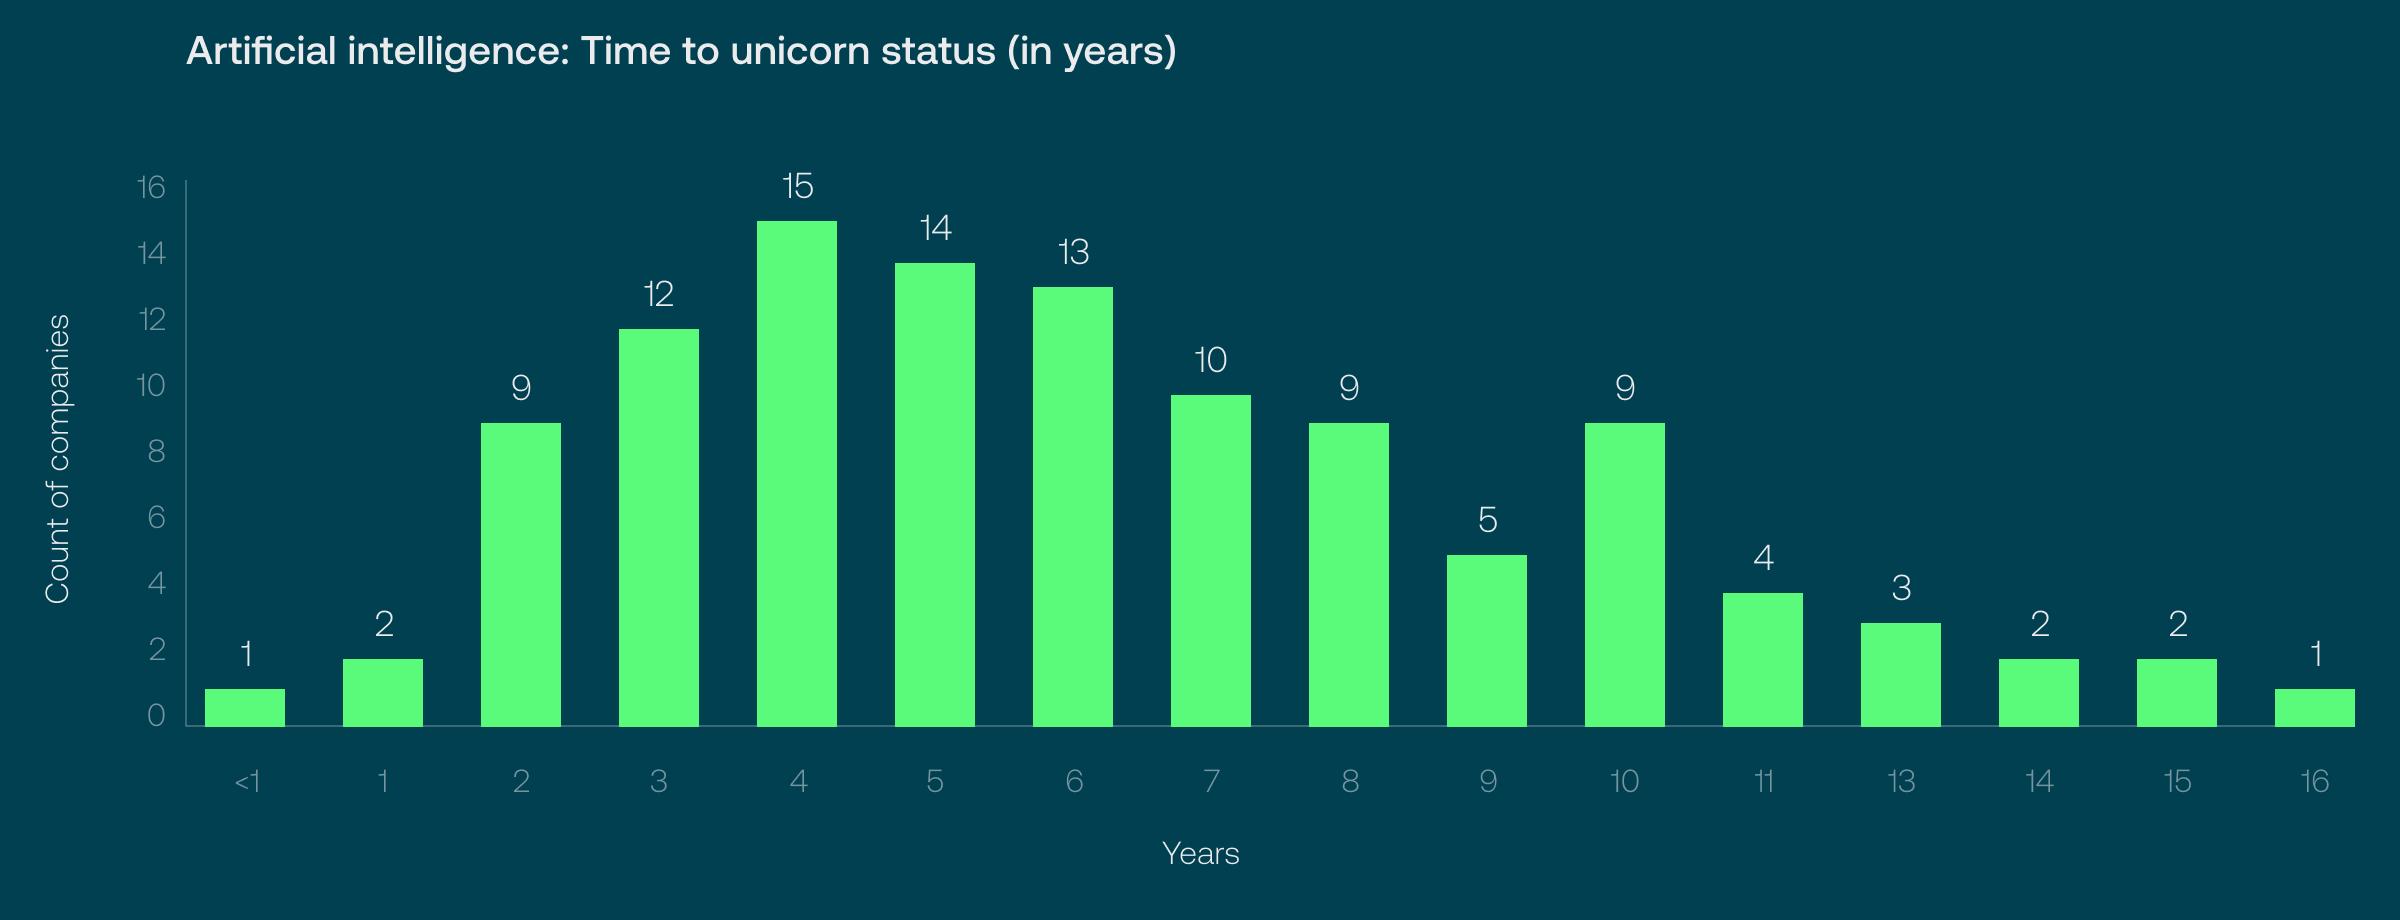 How Long Does it Take to Become a Unicorn__03